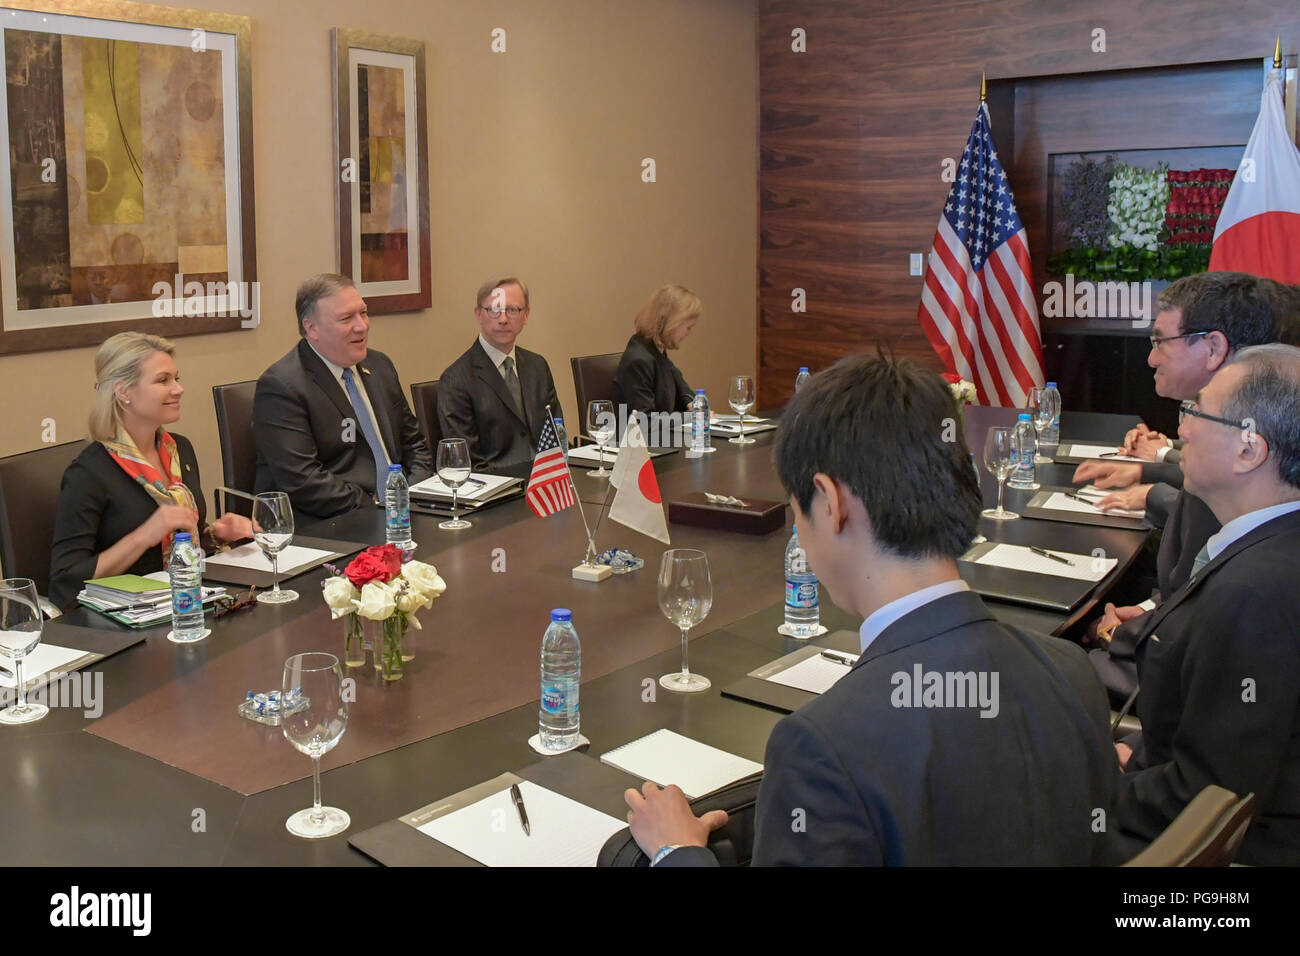 U.S. Secretary of State Mike Pompeo meets with Japanese Foreign Minister Taro Kono, in Amman, Jordan, on April 30, 2018. Stock Photo